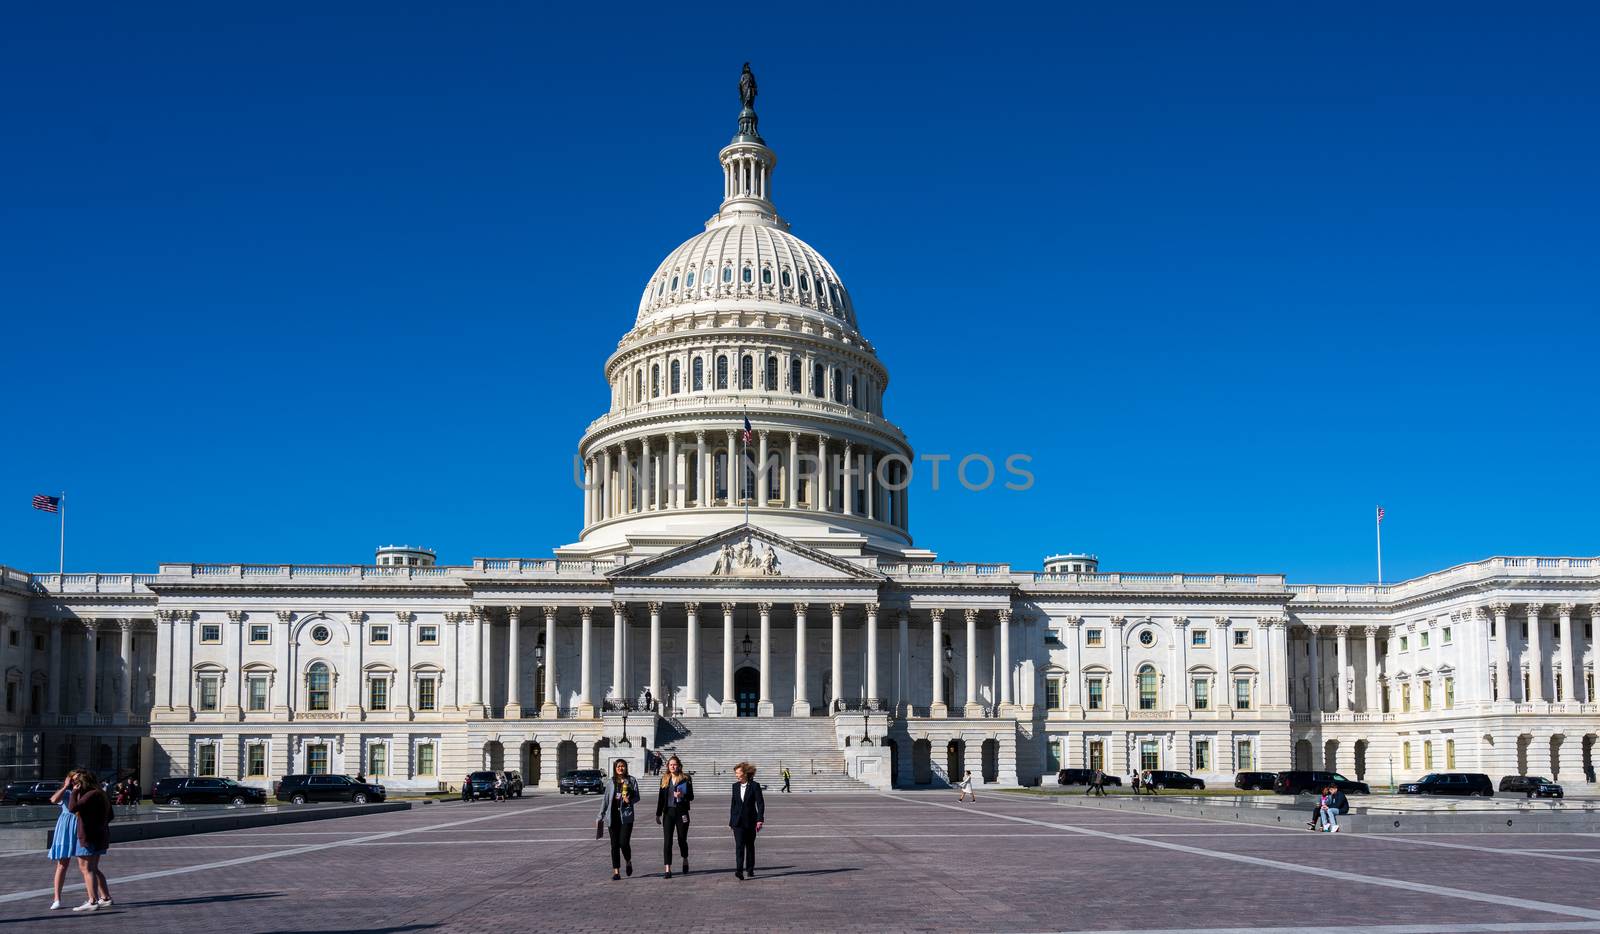 Three Women in Front of the Capitol Building by jfbenning